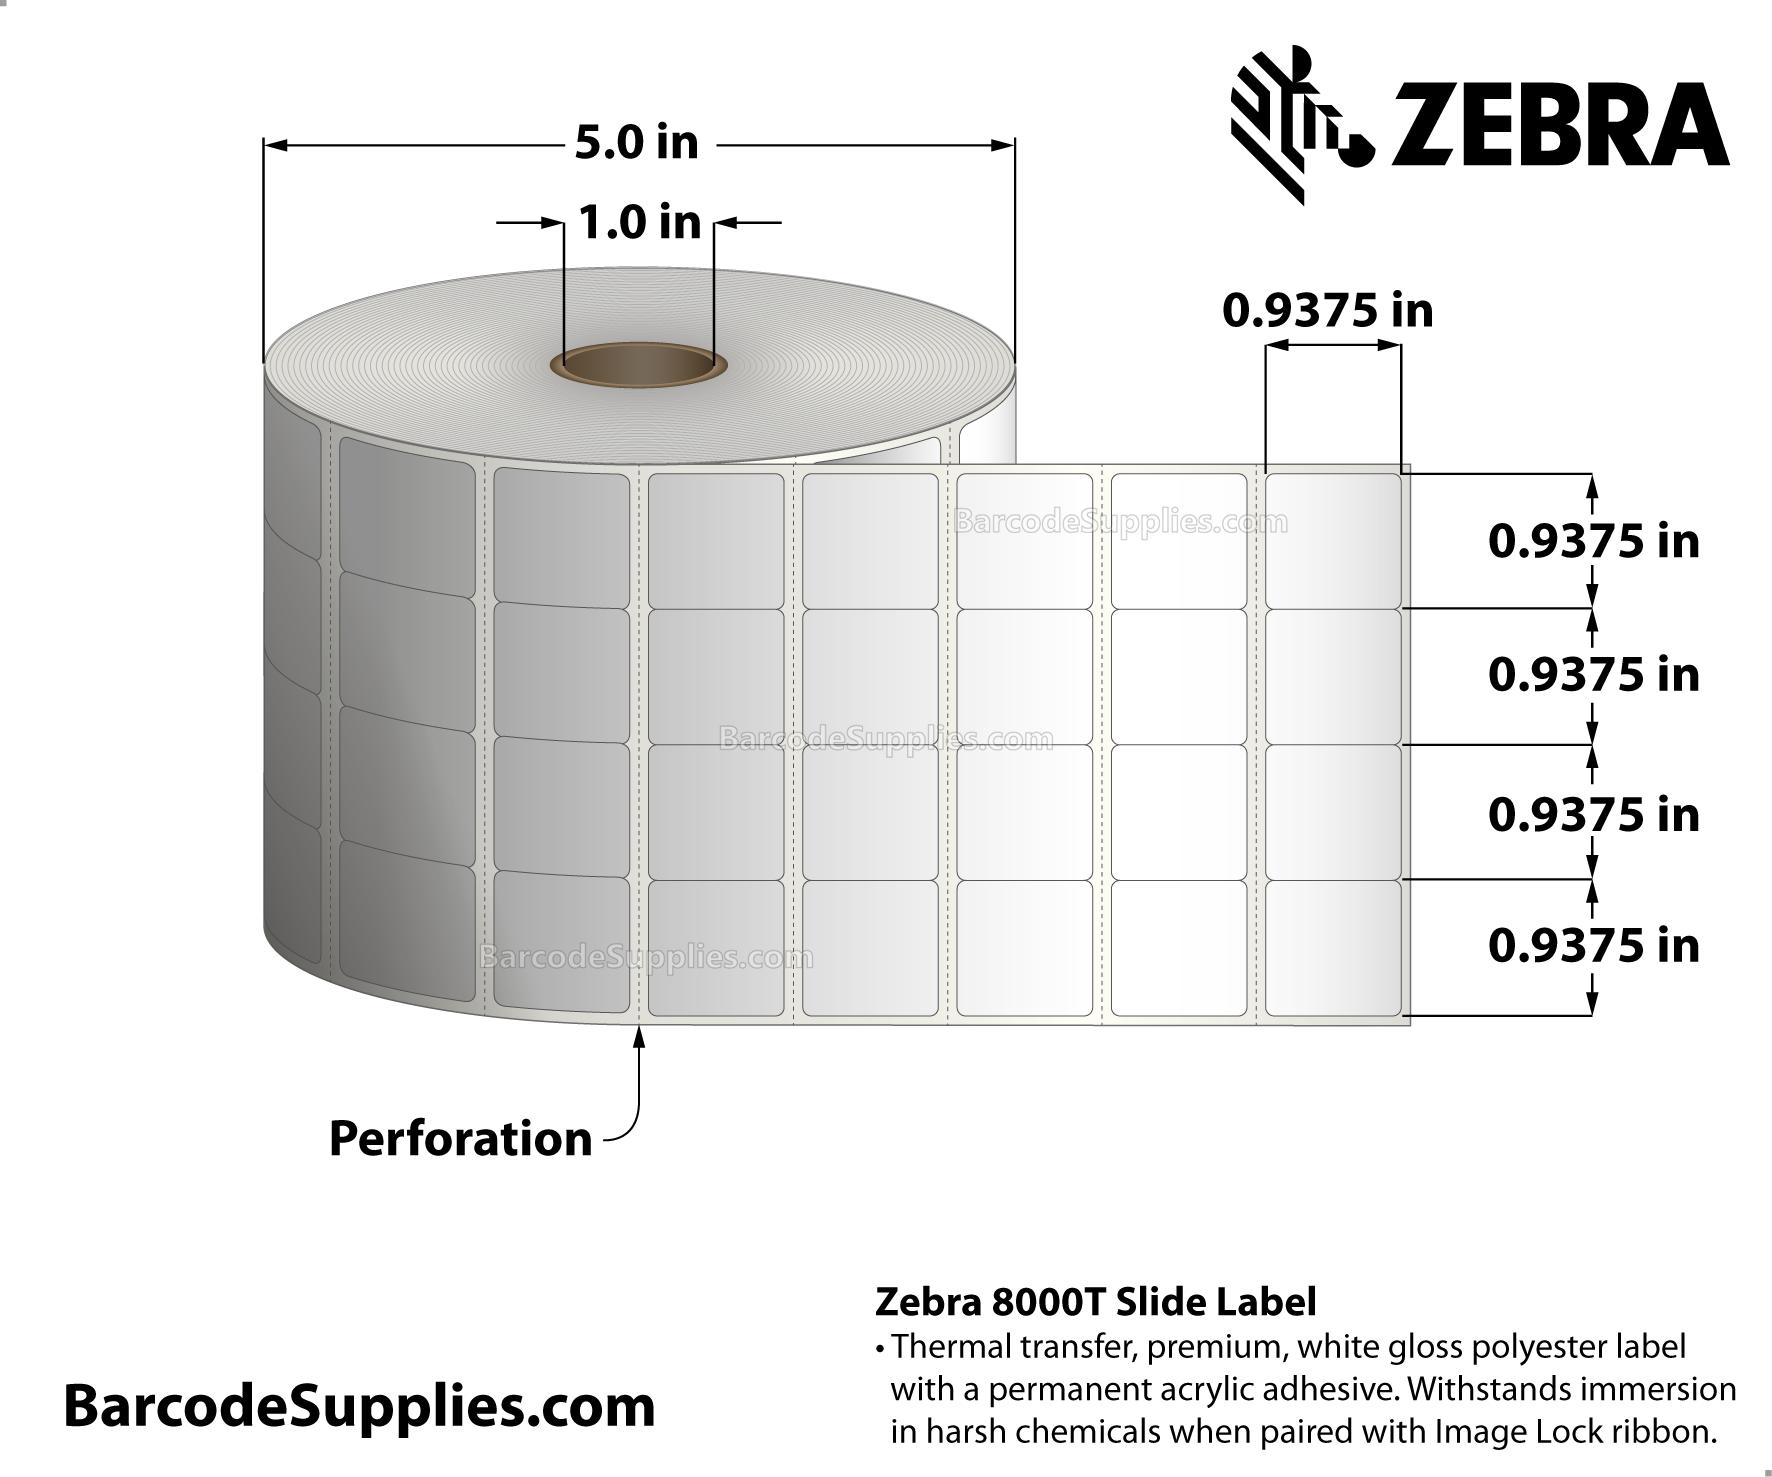 0.9375 x 0.9375 Thermal Transfer White 8000T Slide (4-Across) Labels With Permanent Adhesive - 4 labels across (no gap between labels across). Cerner format. - Perforated - 8760 Labels Per Roll - Carton Of 4 Rolls - 35040 Labels Total - MPN: 10034298